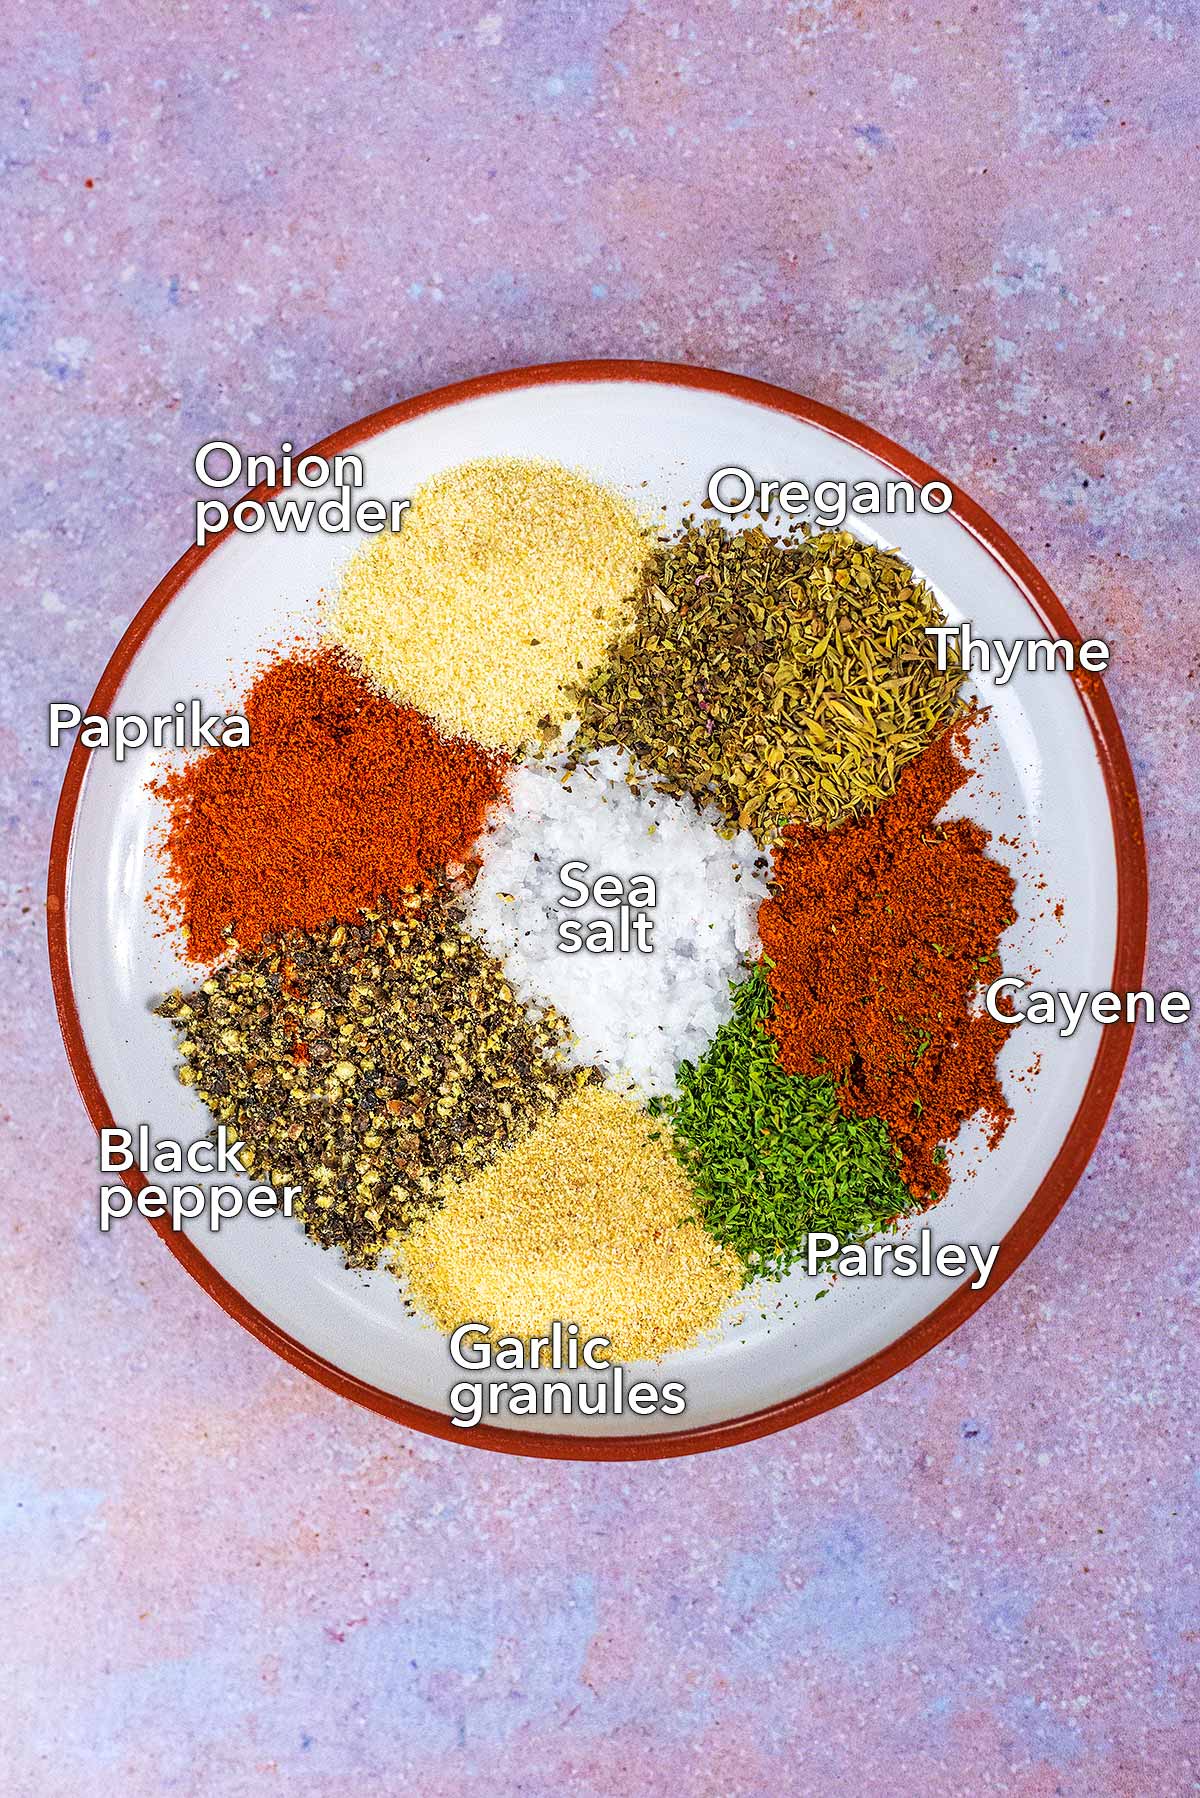 A plate with 9 different herbs and spices on it. All are labelled with text overlay.